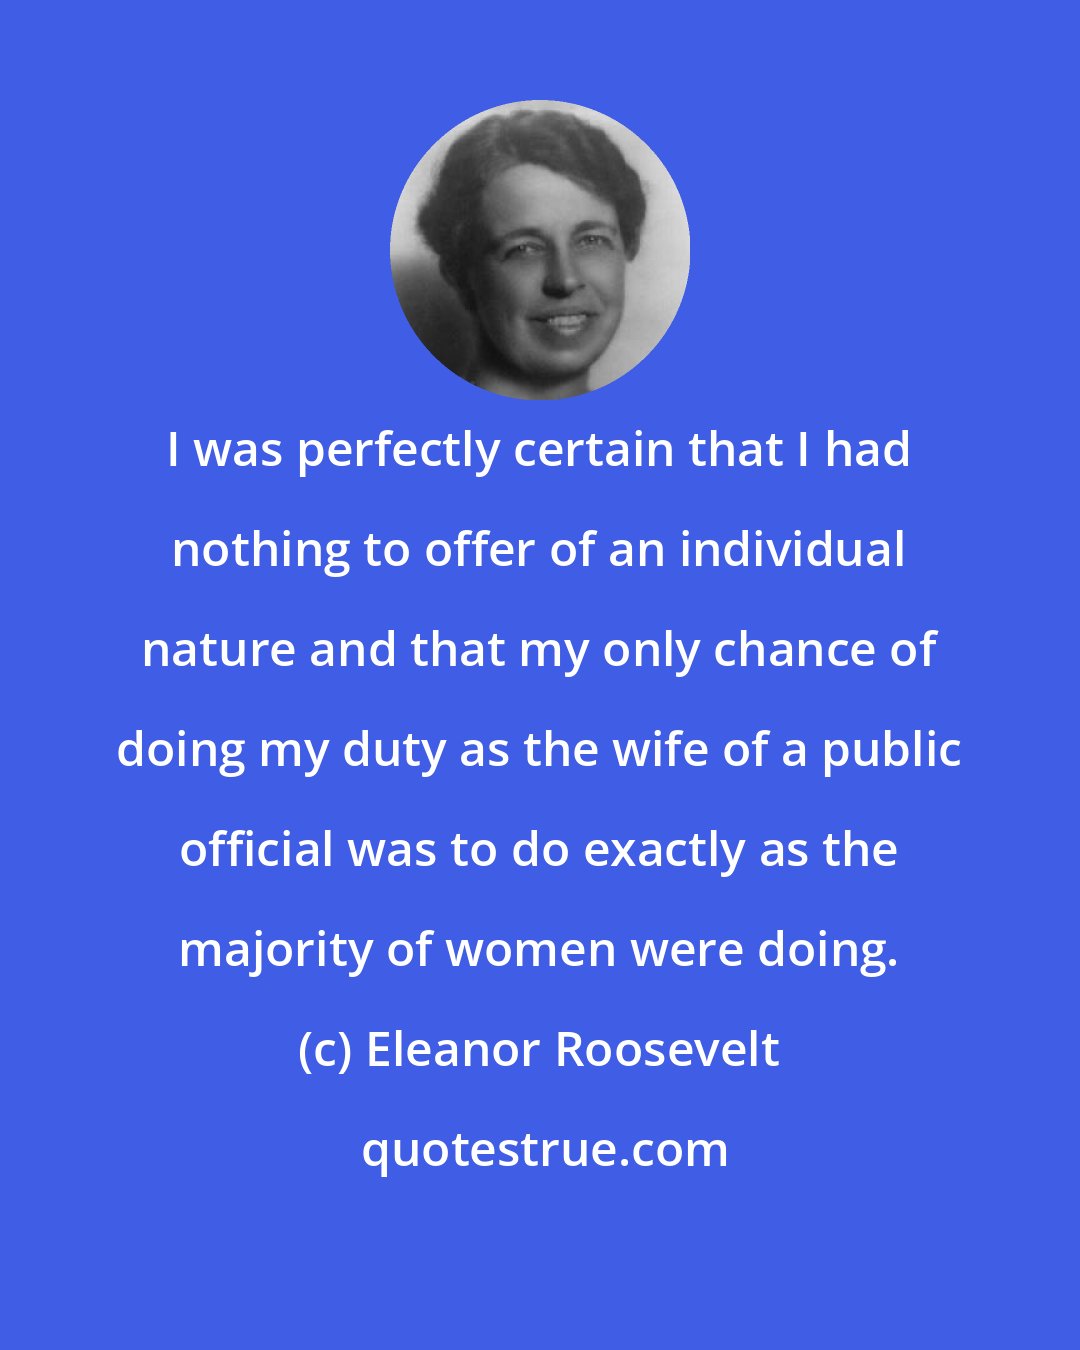 Eleanor Roosevelt: I was perfectly certain that I had nothing to offer of an individual nature and that my only chance of doing my duty as the wife of a public official was to do exactly as the majority of women were doing.